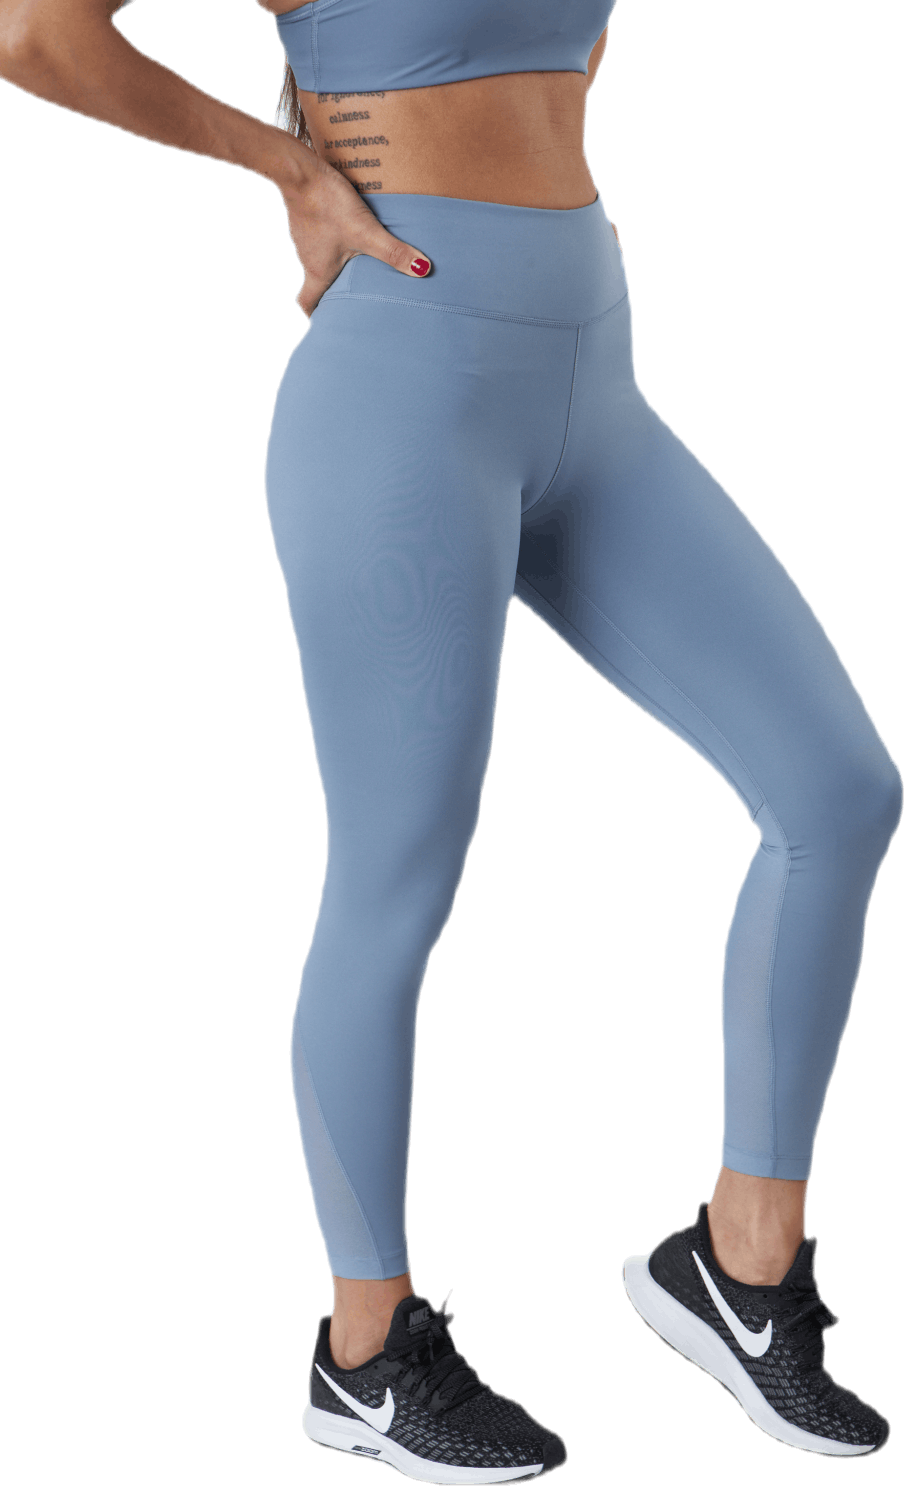 One Mid-Rise 7/8 Tight Grey